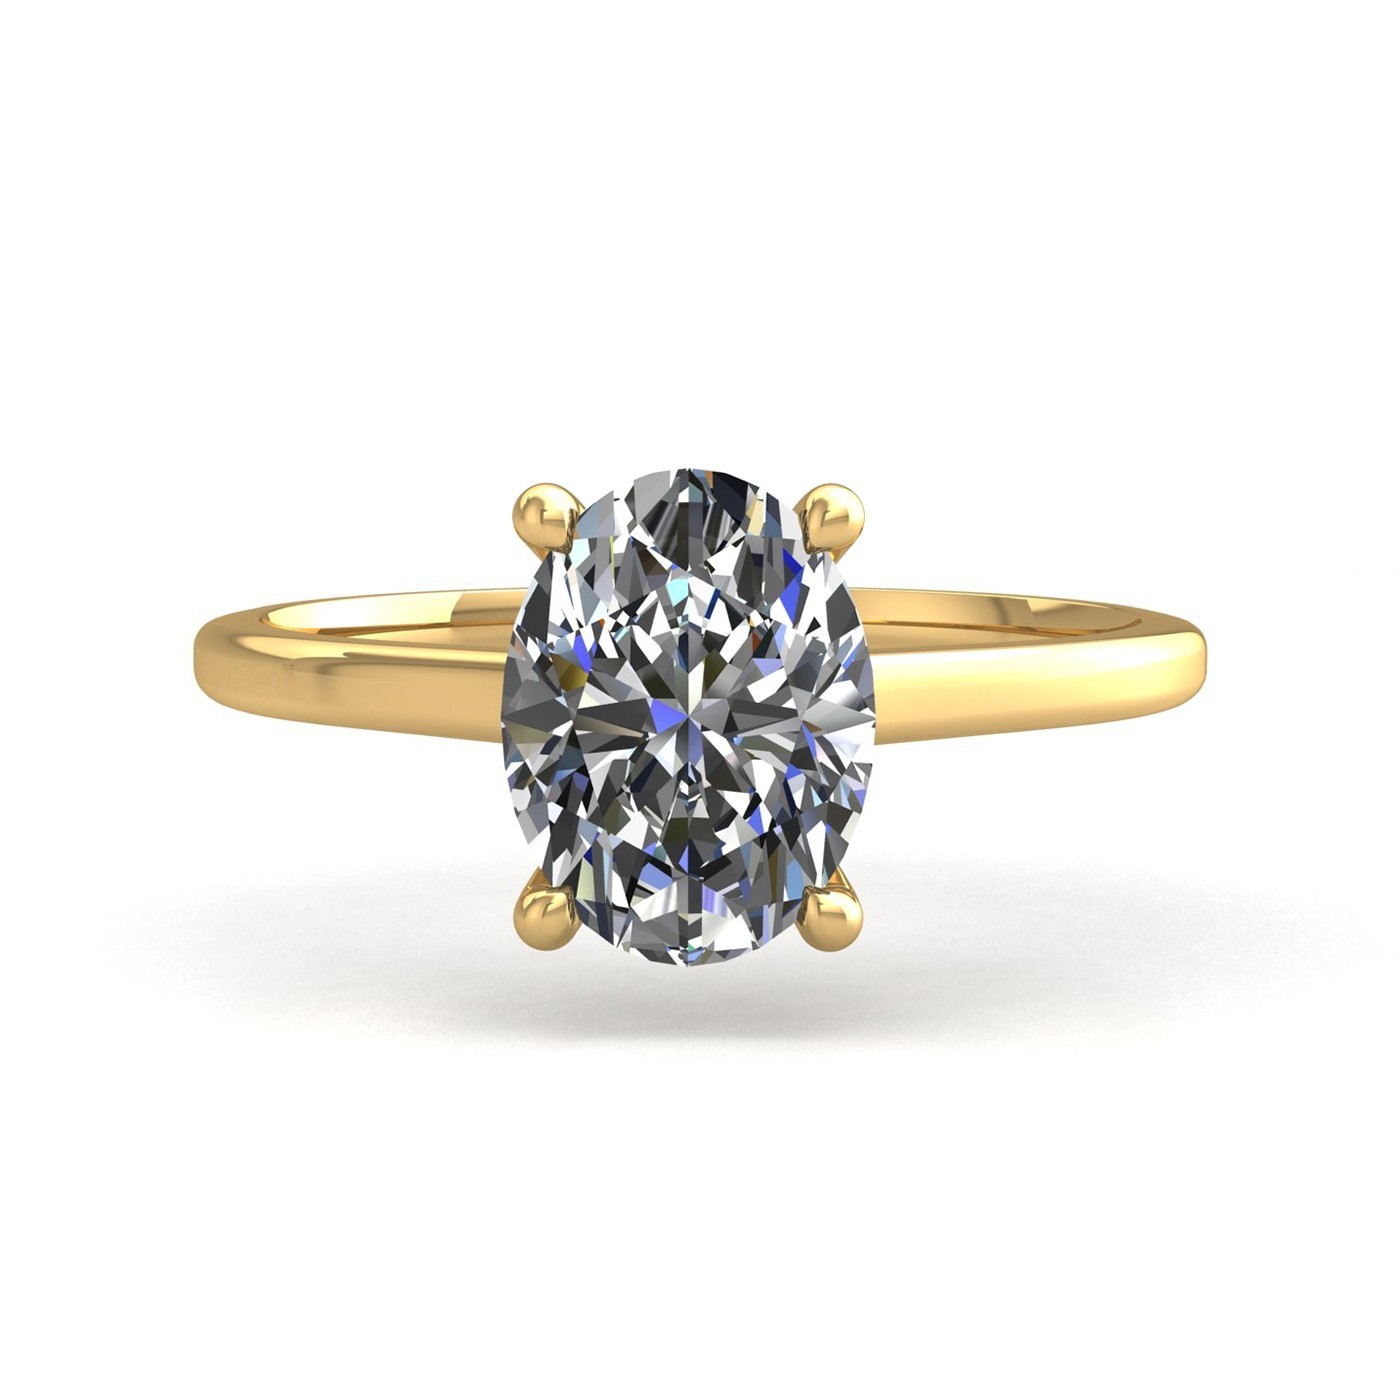 18k yellow gold  1,20 ct 4 prongs solitaire oval cut diamond engagement ring with whisper thin band